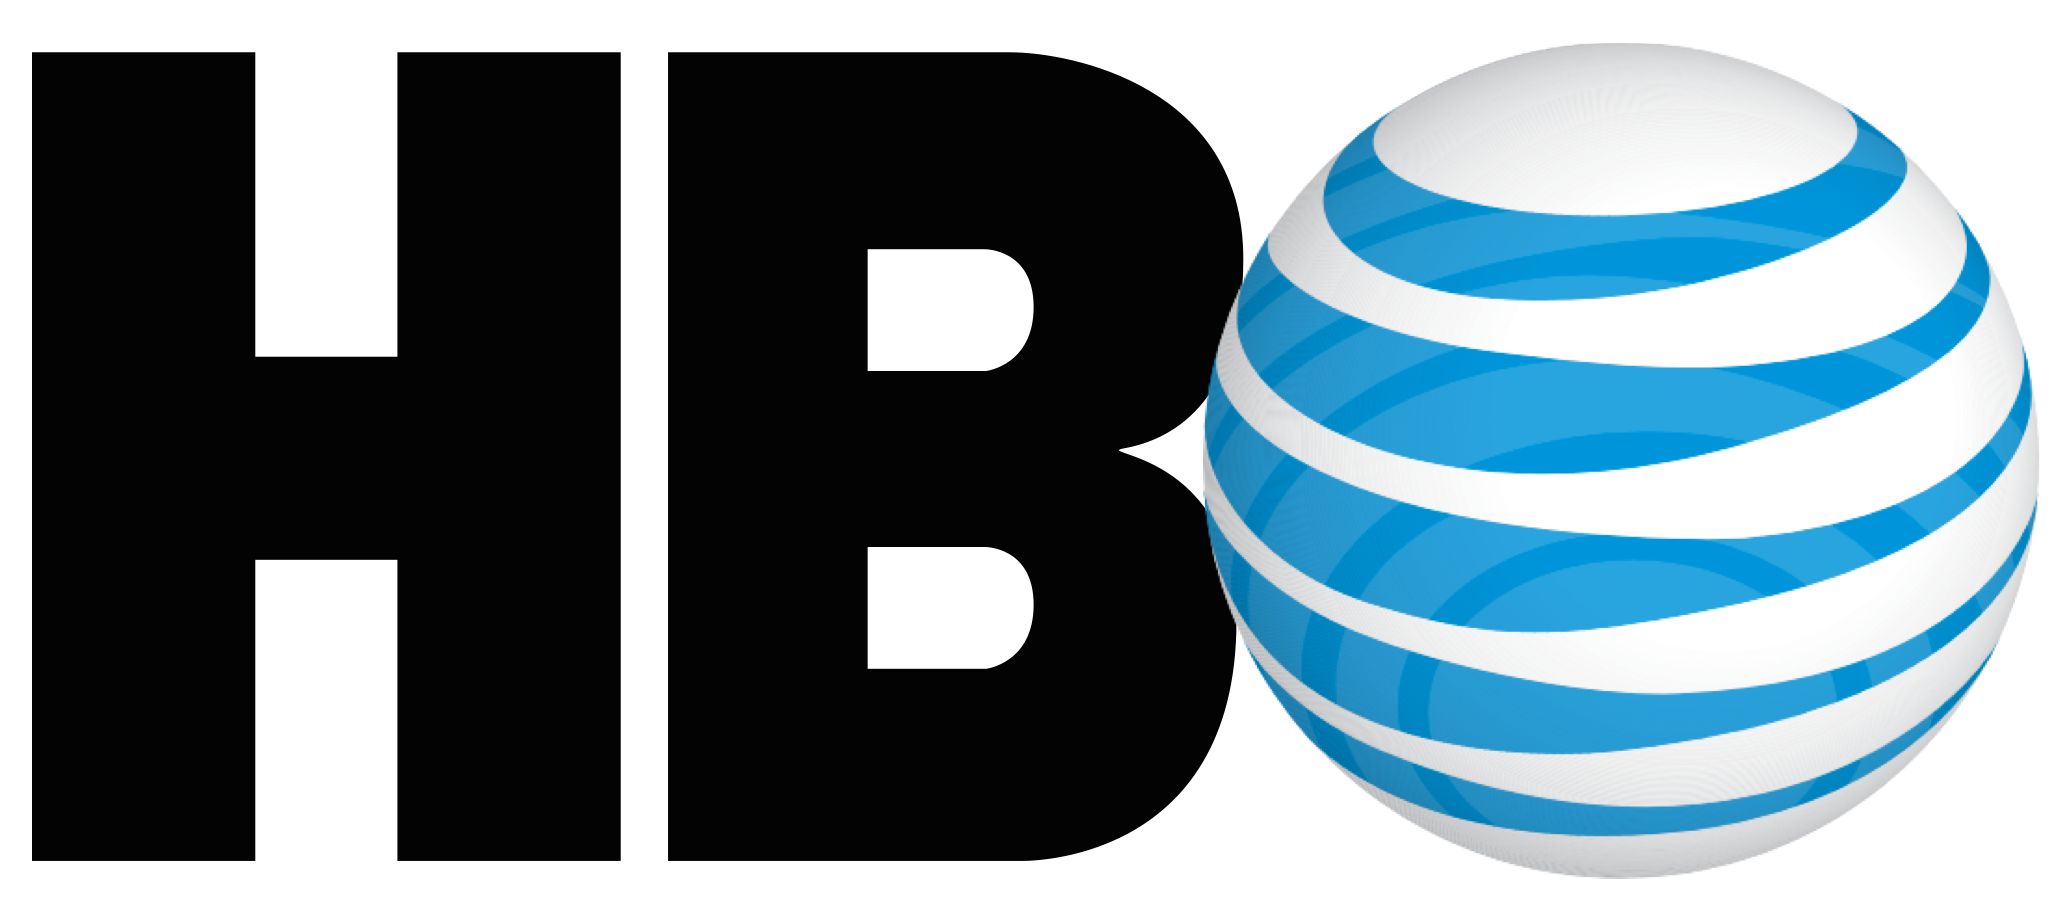 AT&T, Time Warner Stock Prices Fall Slightly Amid Merger Skepticism